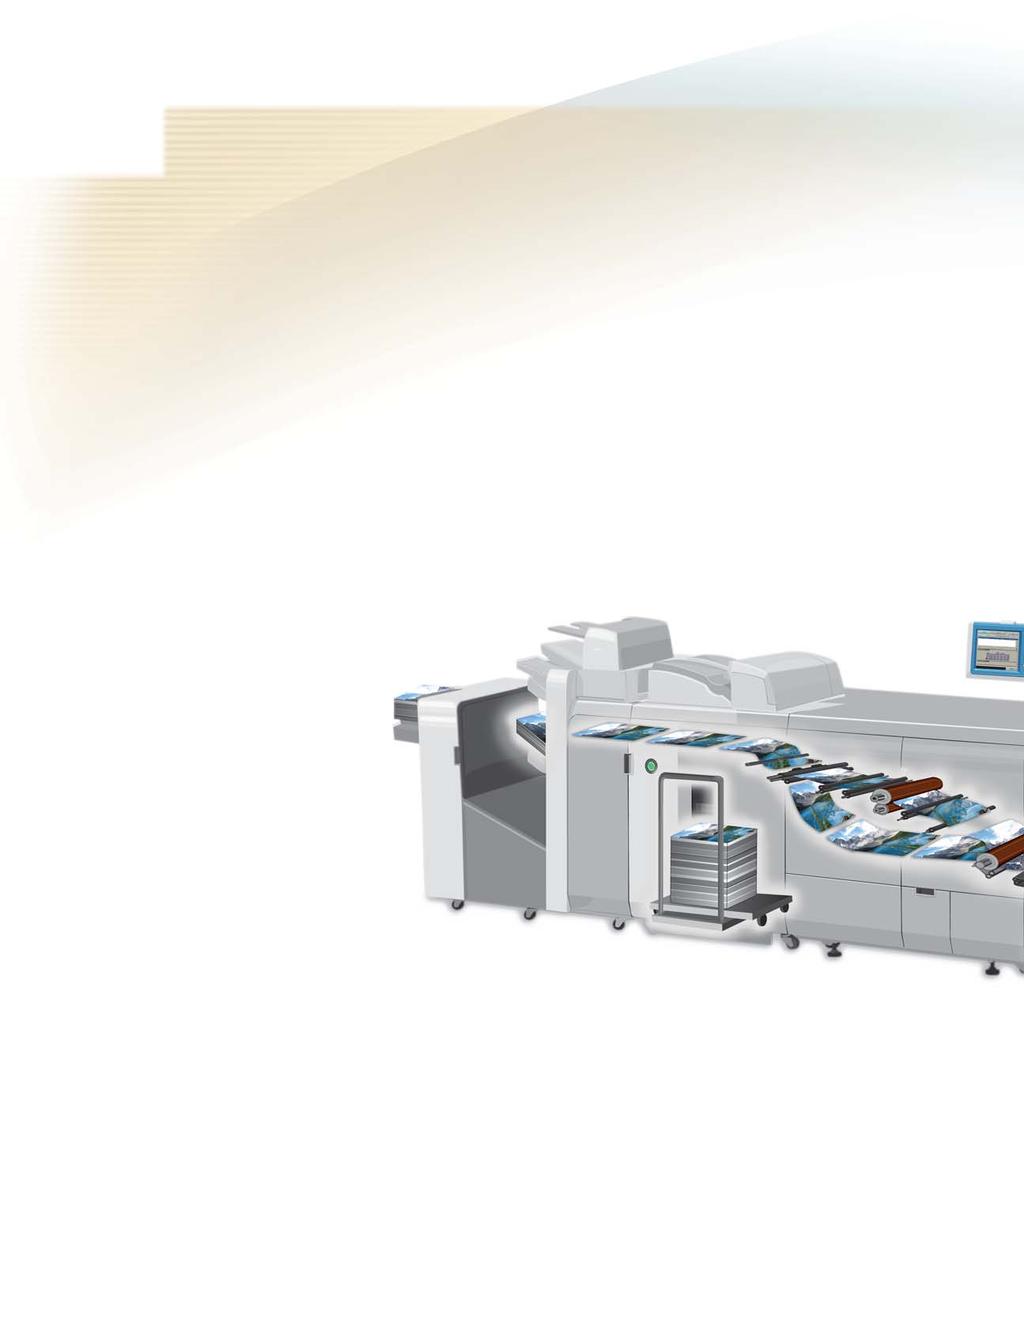 Take the imagepress C7000VP Digital Press Tour Canon s investment resulted in better image quality, productivity, and versatility.